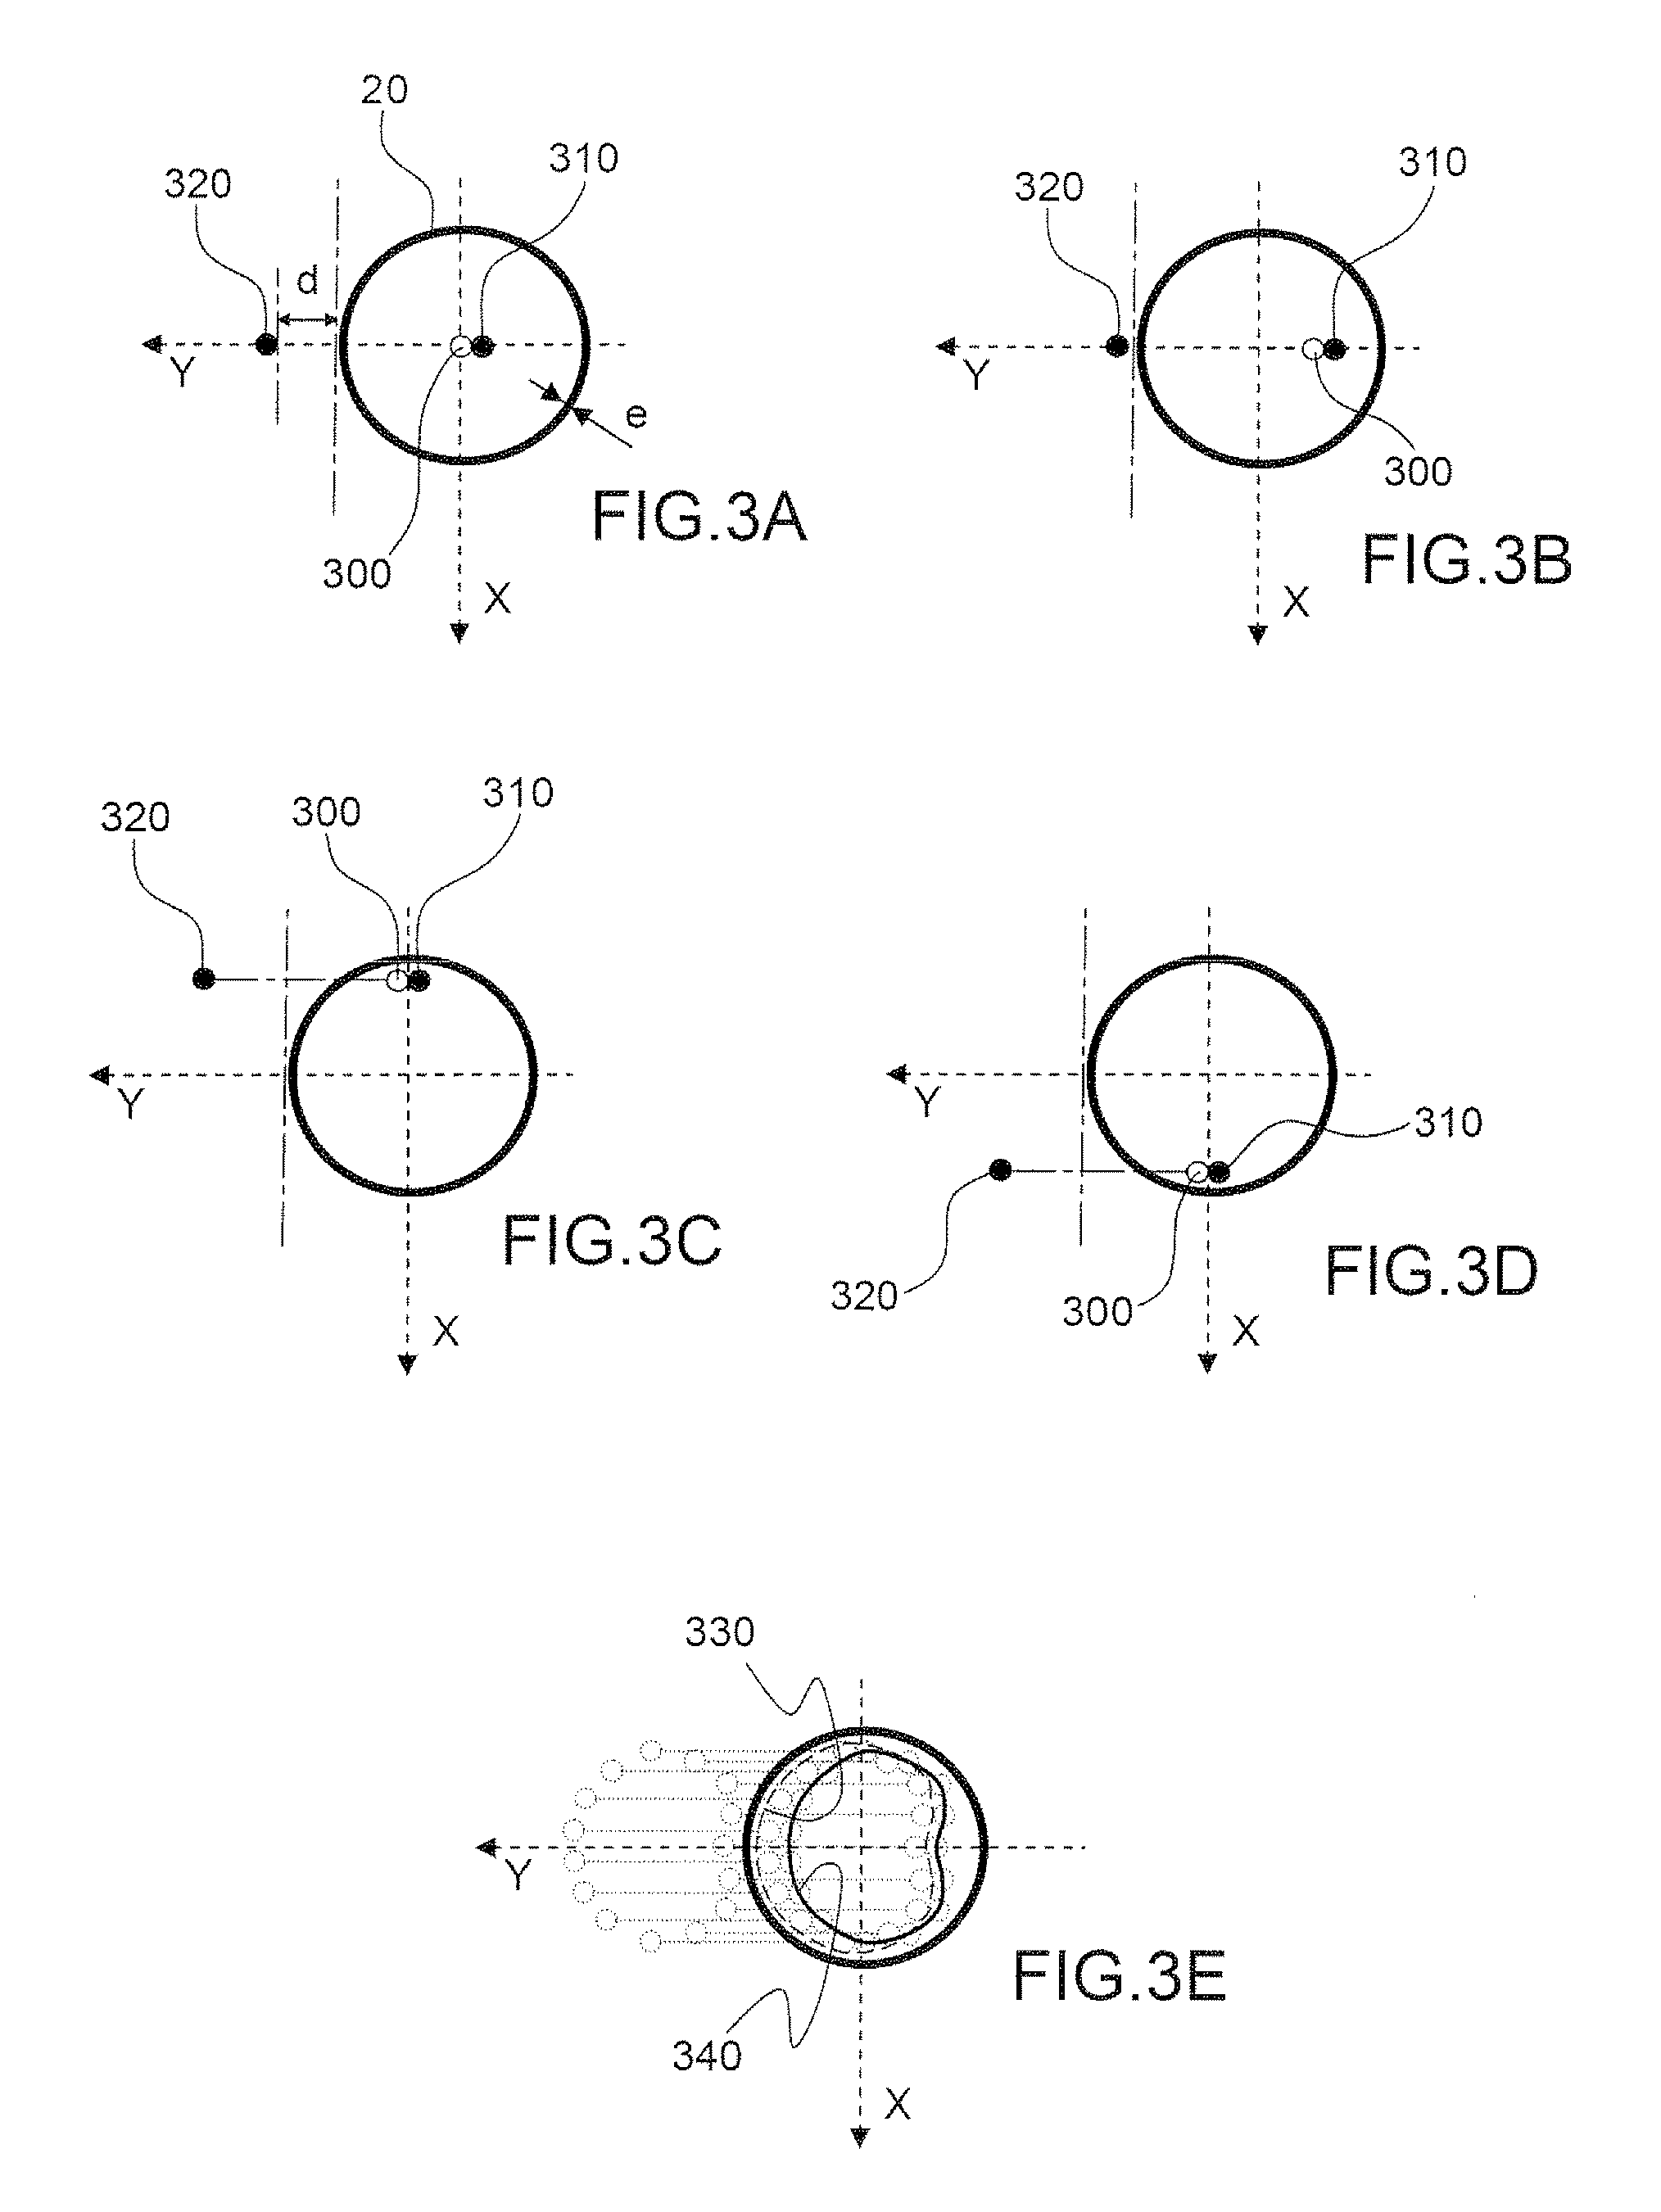 Directly detection device of trajectories of drops issuing from liquid jet, associated electrostatic sensor, print head and continuous ink jet printer